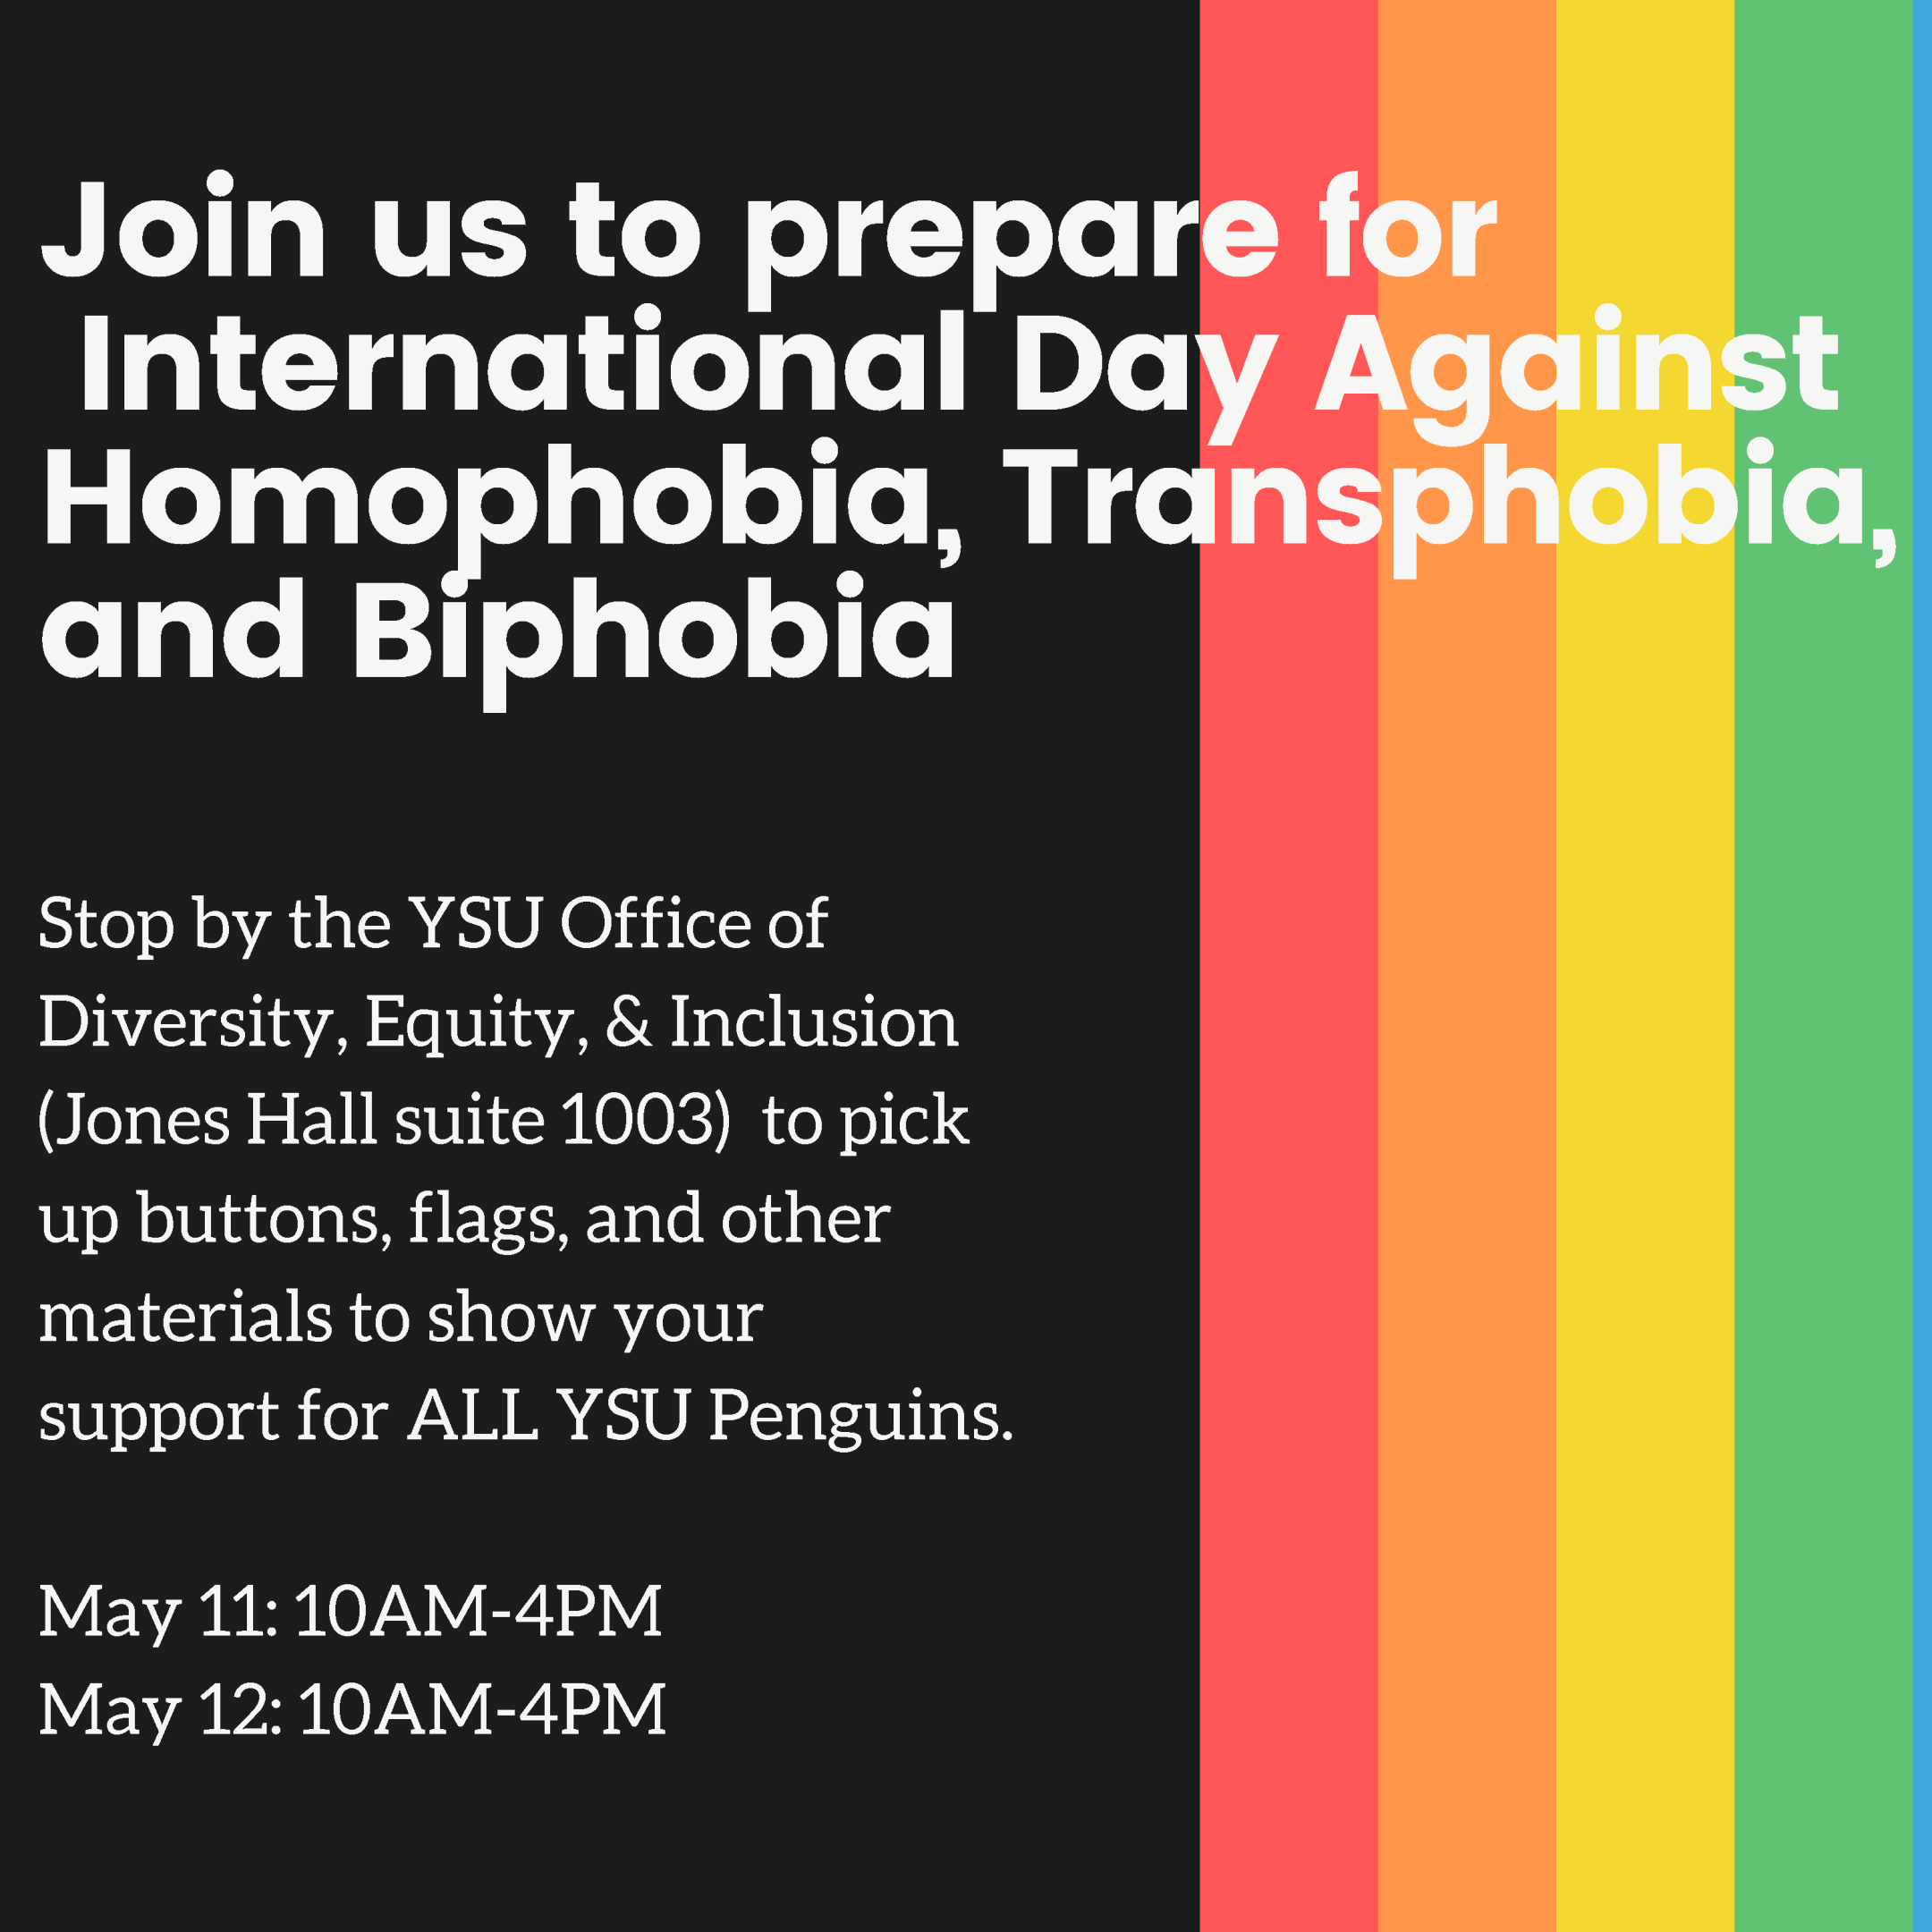 Join us to prepare for International Day Against homophobia transphobia and biphobia. stop by the ysu office of diversity equity and inclusion (jones hall suite 1003) to pick up buttons, flags, and other materials to show your support for all ysu penguins. may 11 10am-4pm may 12 10am-4pm